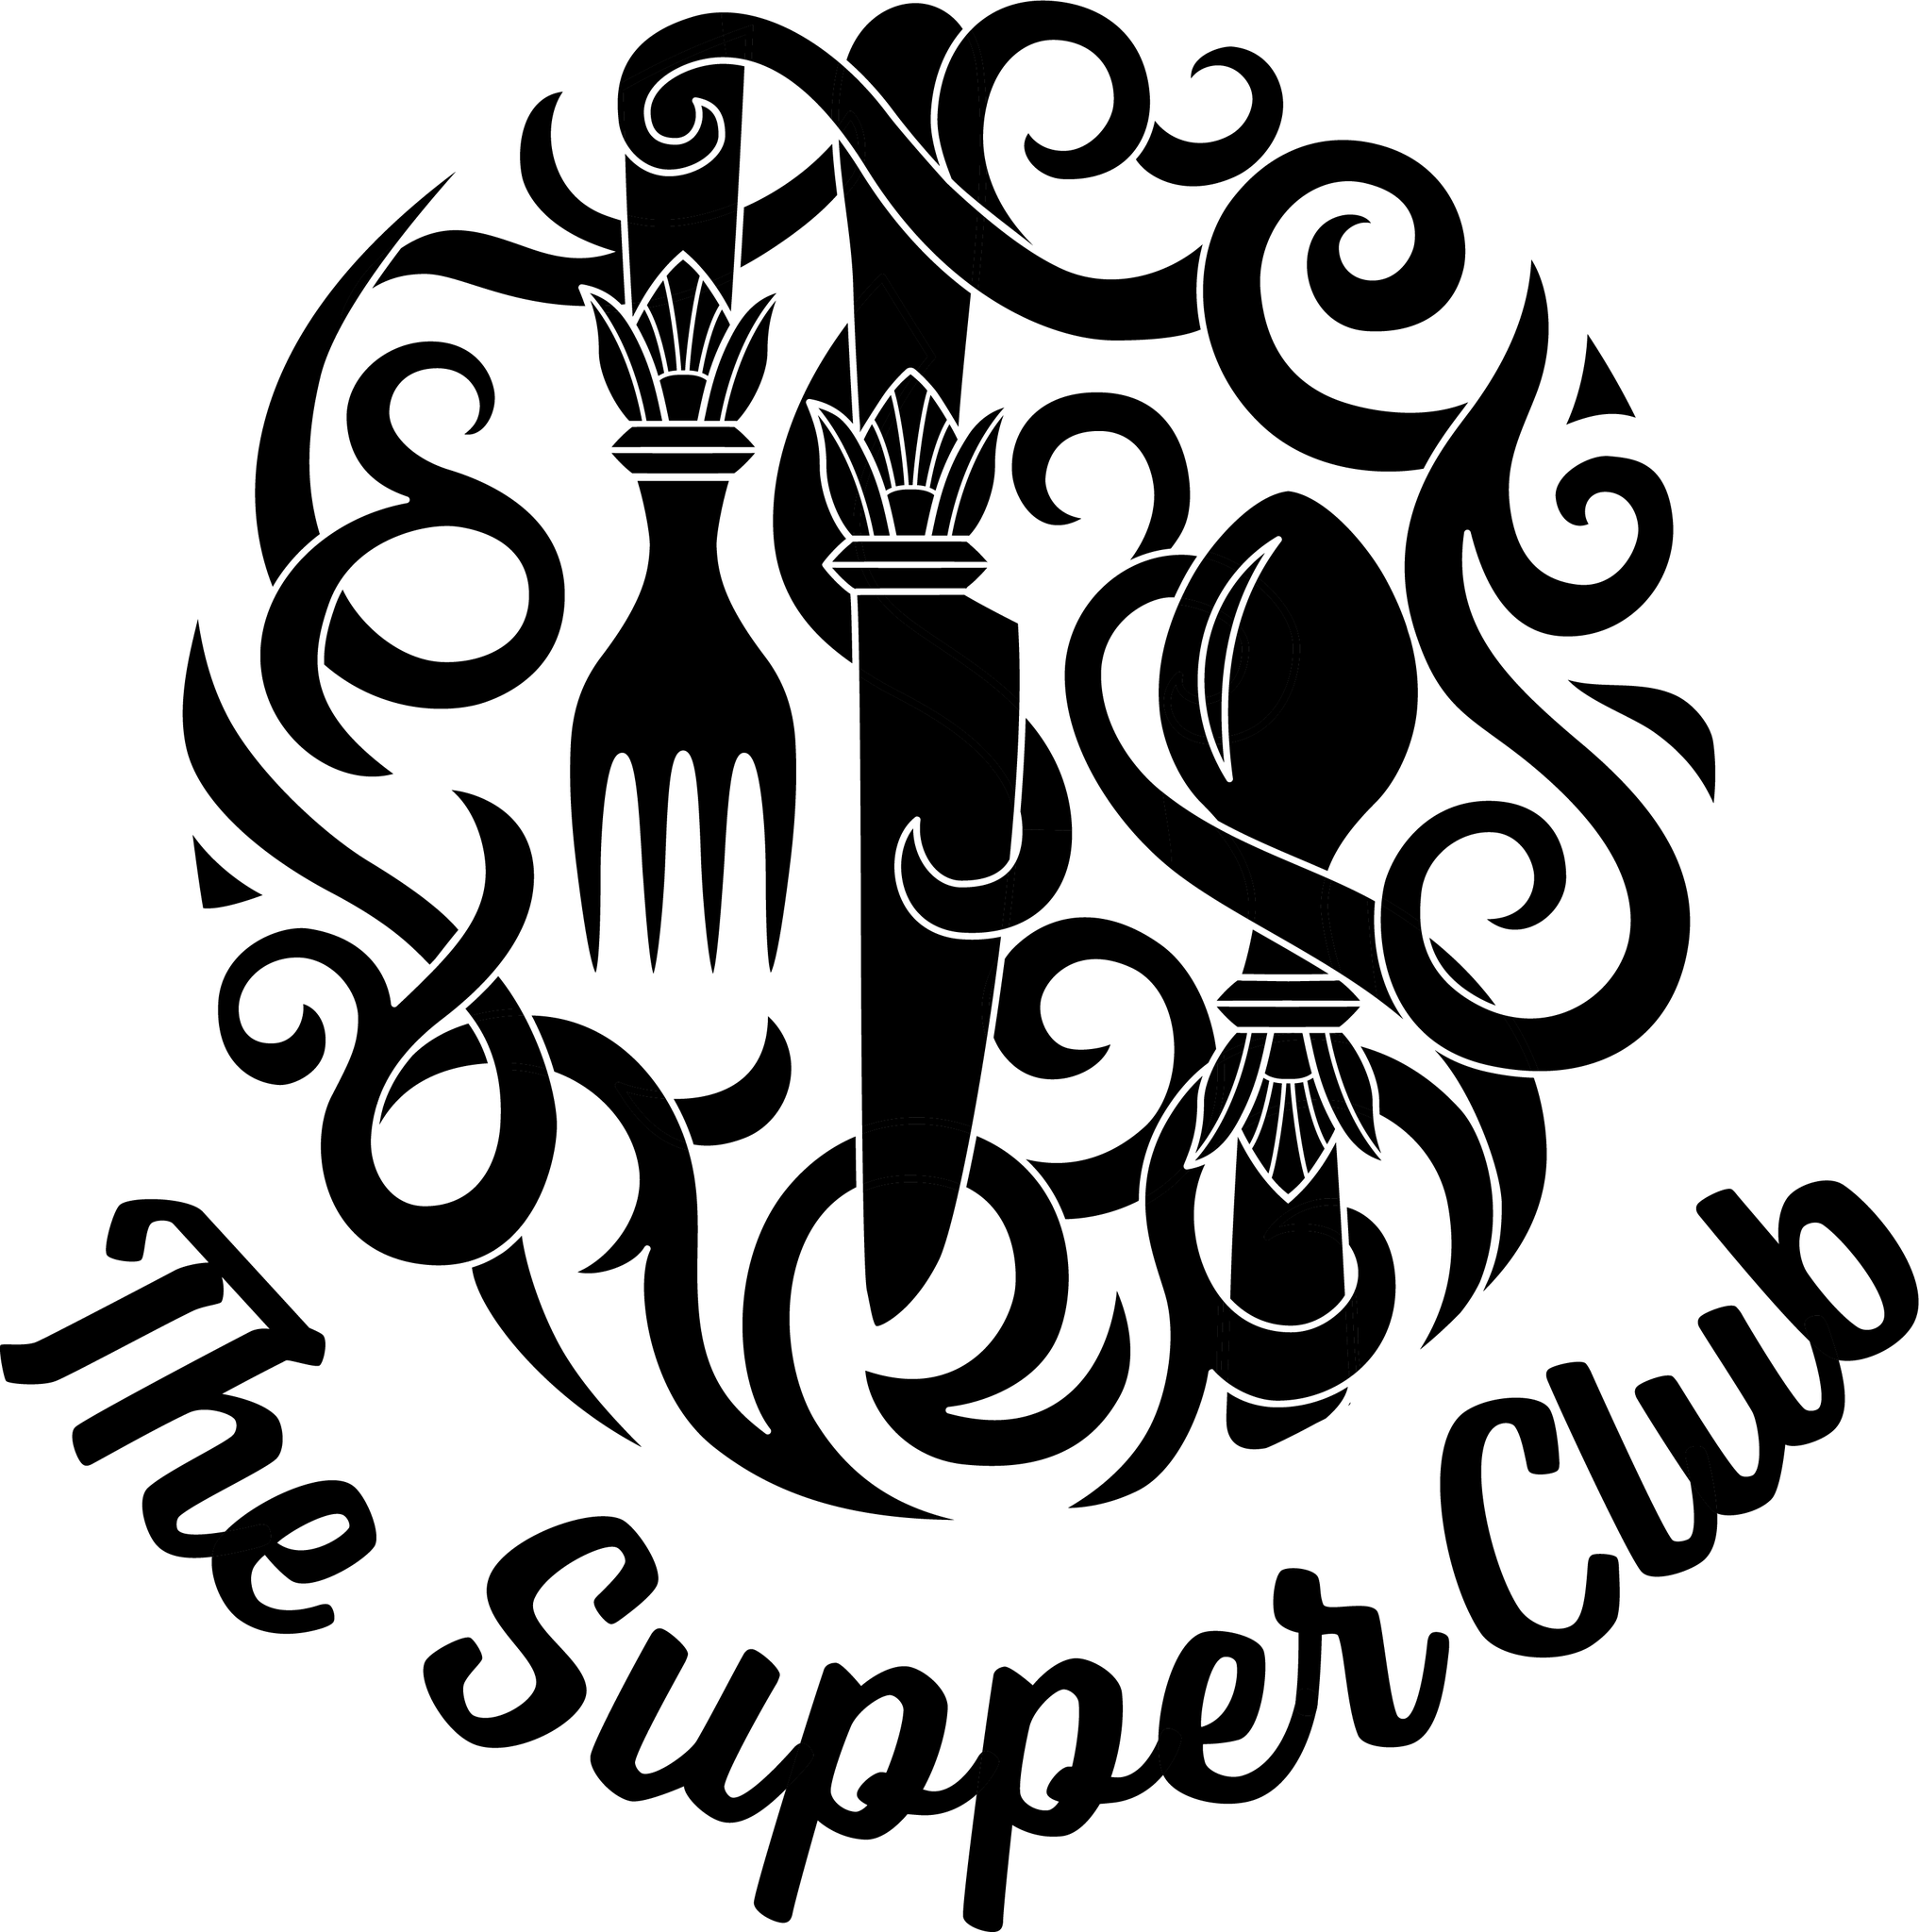 Auditions for The Supper Club, by Navasota Theatre Alliance